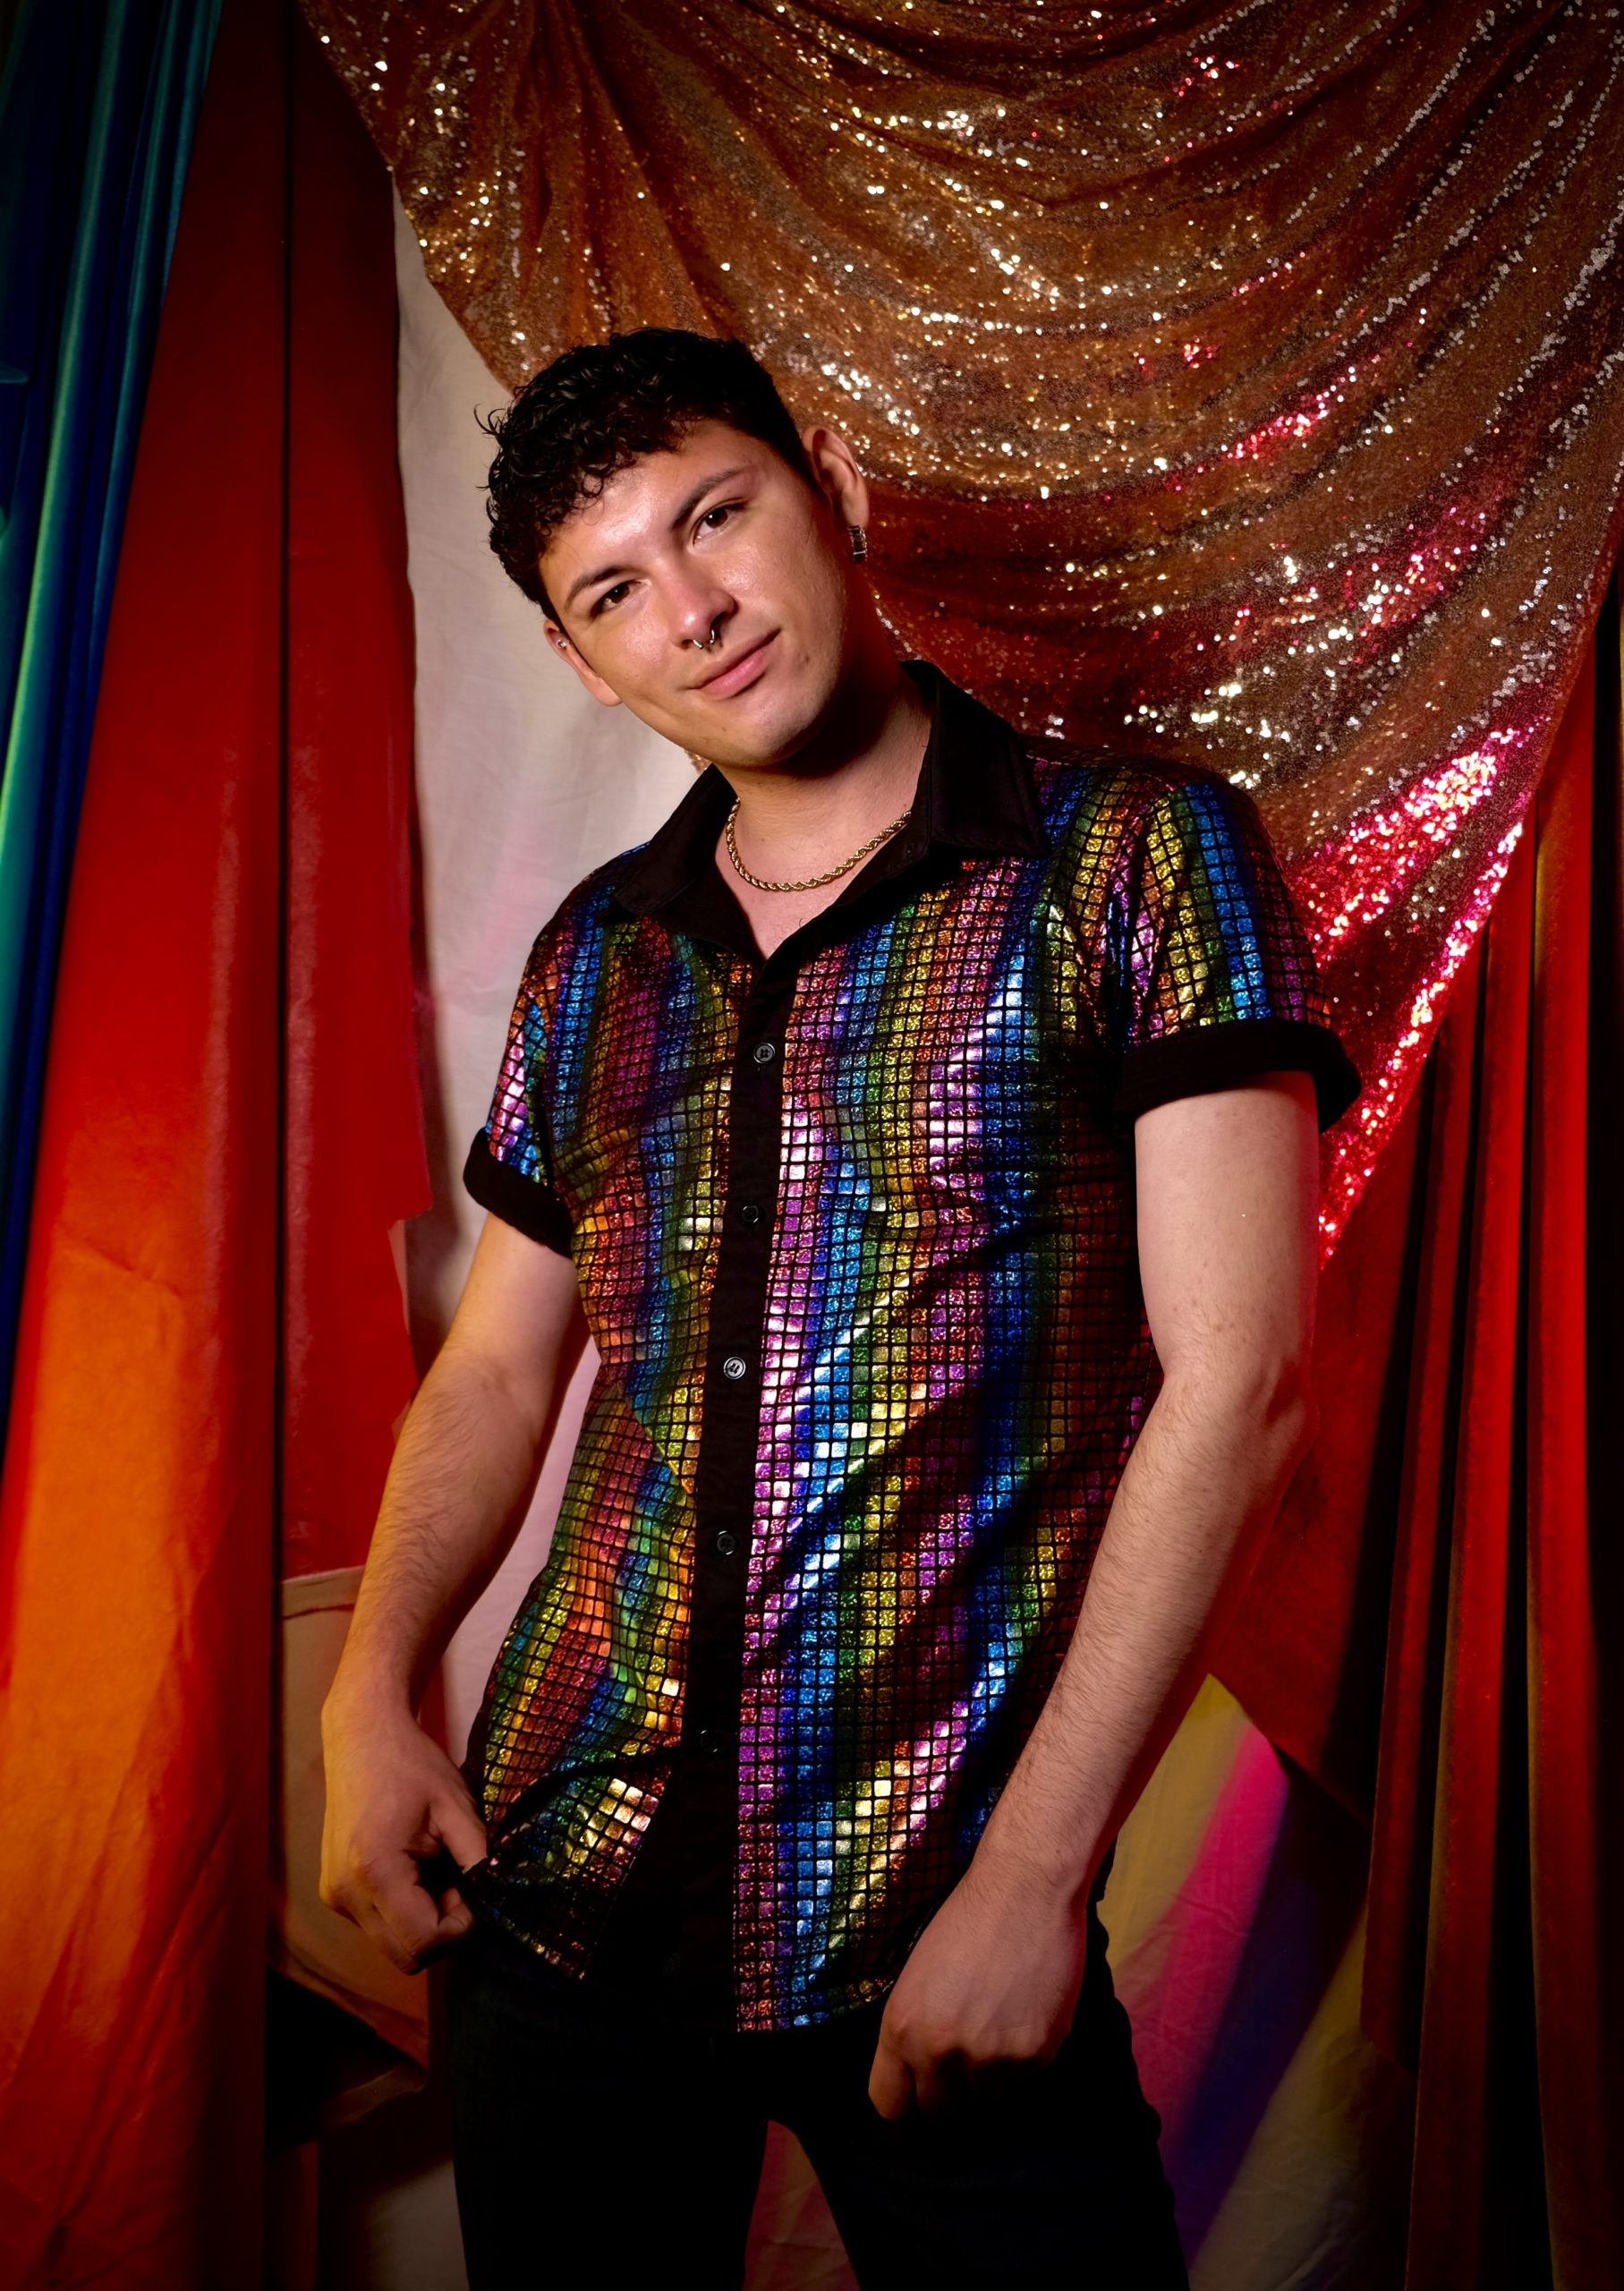 Jesse stands in front of a red sequin curtain while wearing a checkered rainbow button up shirt.